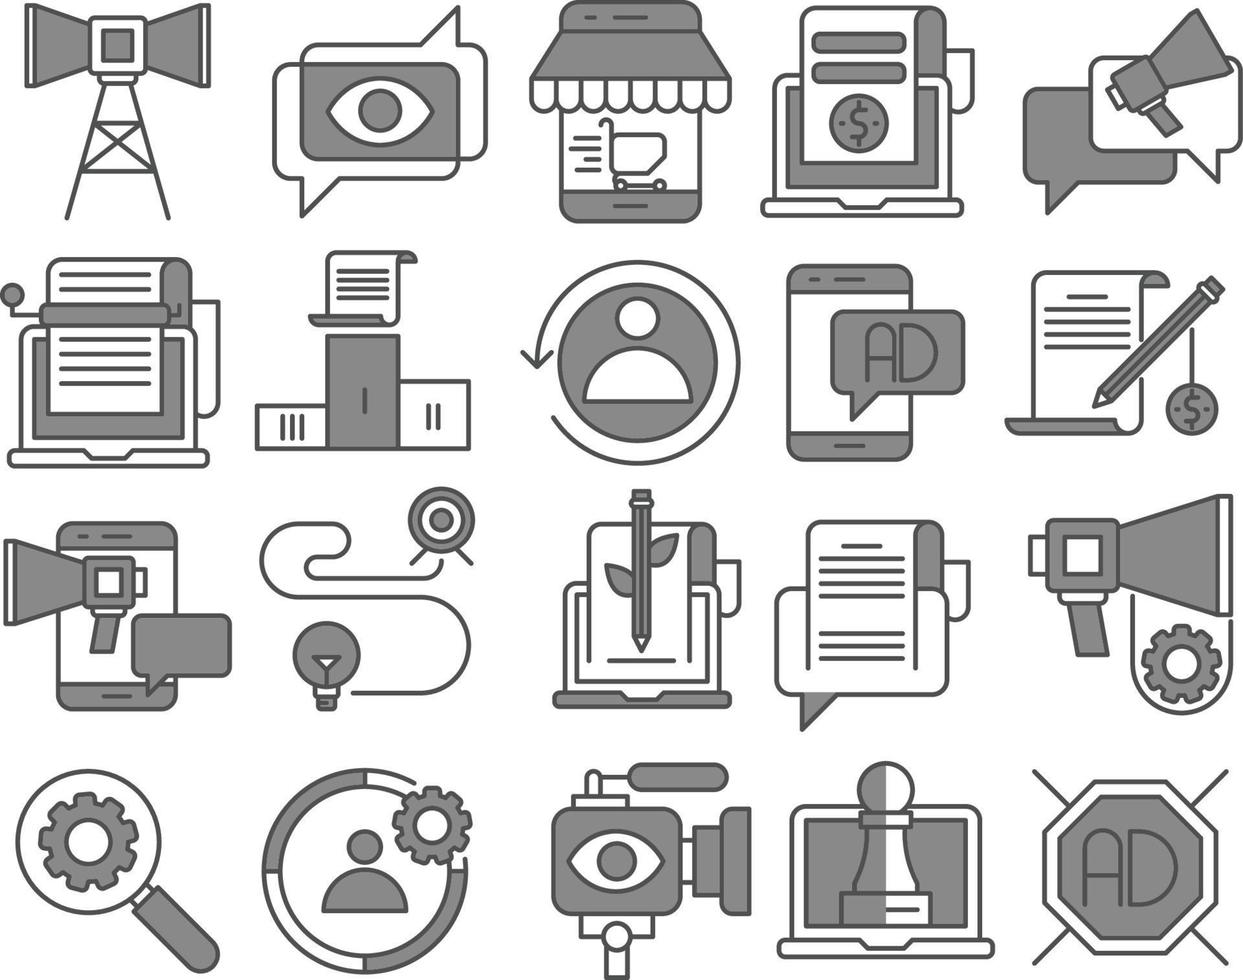 Set of Vector Icons Related to Digital marketing.